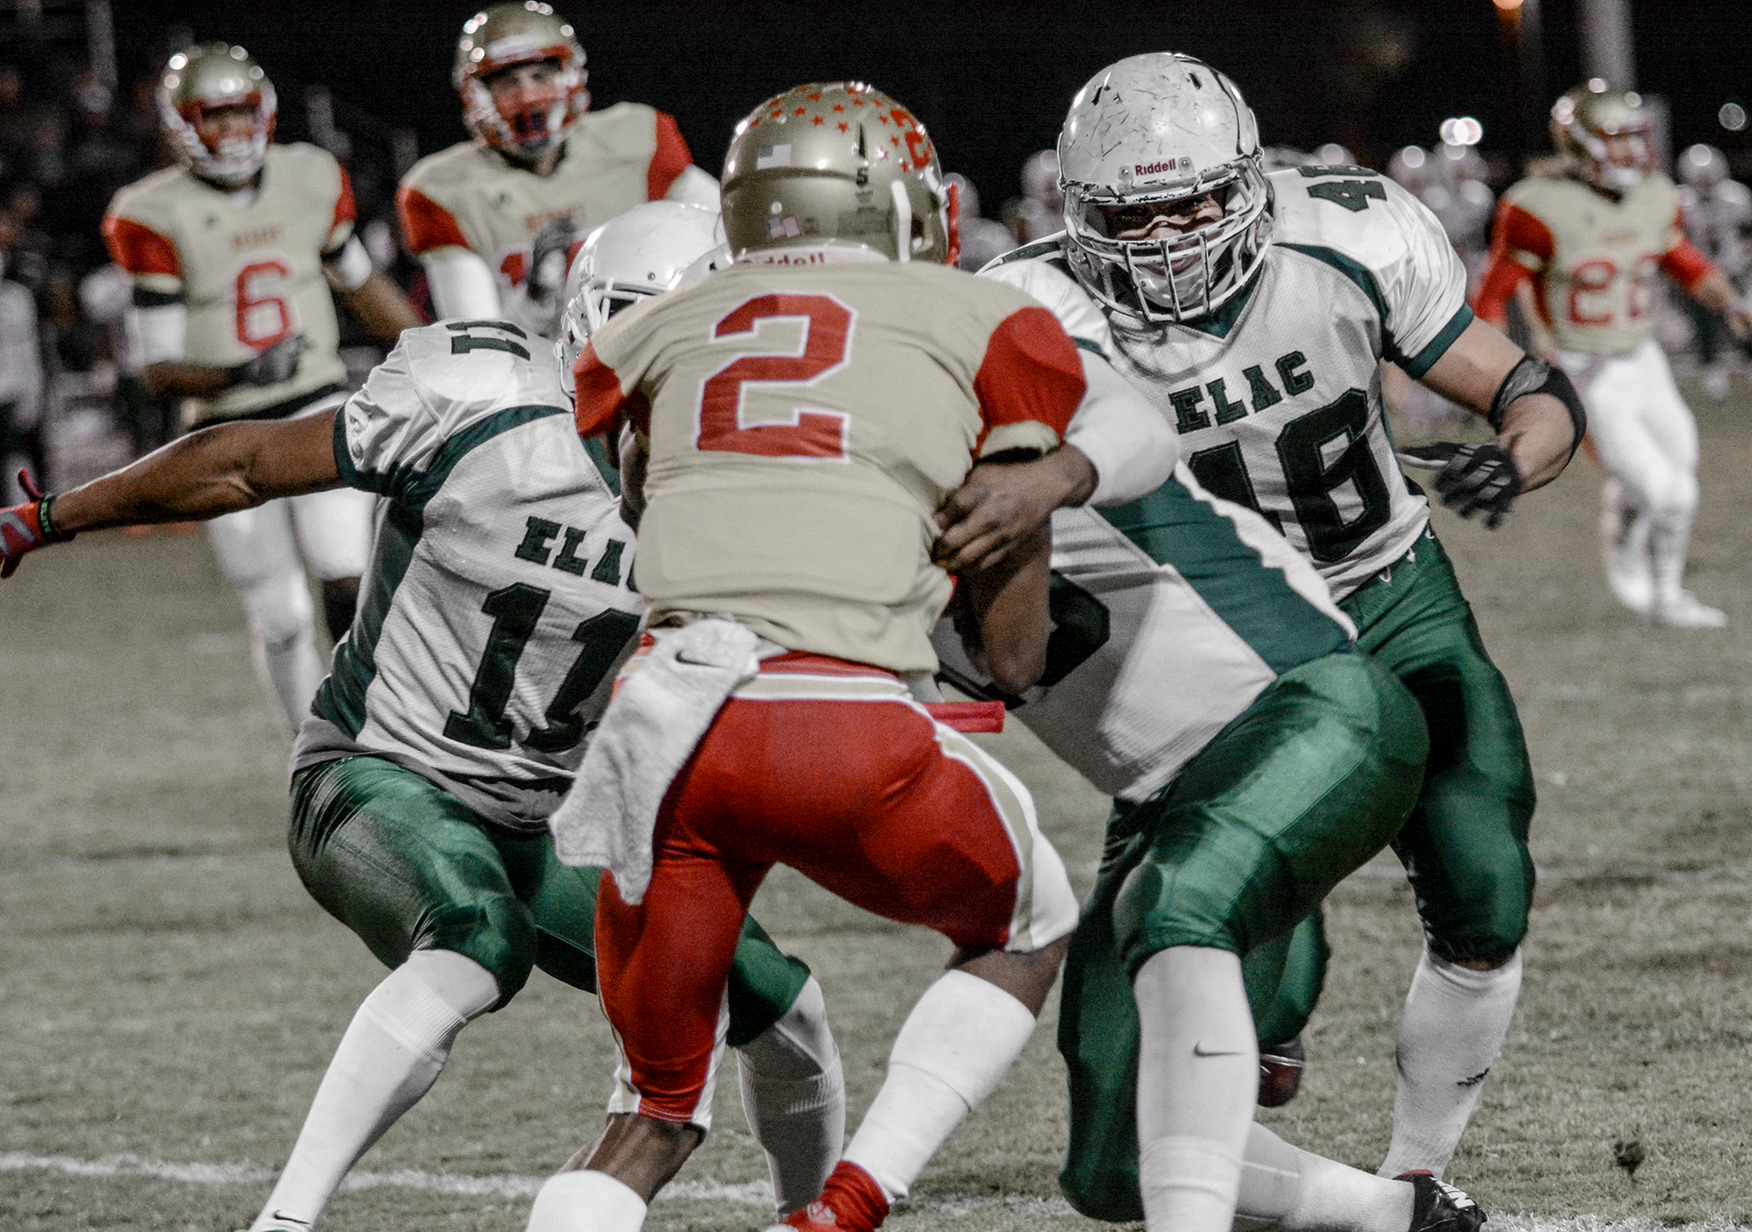 ELAC sophomores, corner back Cinwon Whitehead (No. 11) and linebacker Anthony Perez, attempt to assist in a tackle of the Desert quarterback in a 63-37 Patriotic Bowl win. (Photo by Tadzio Garcia)